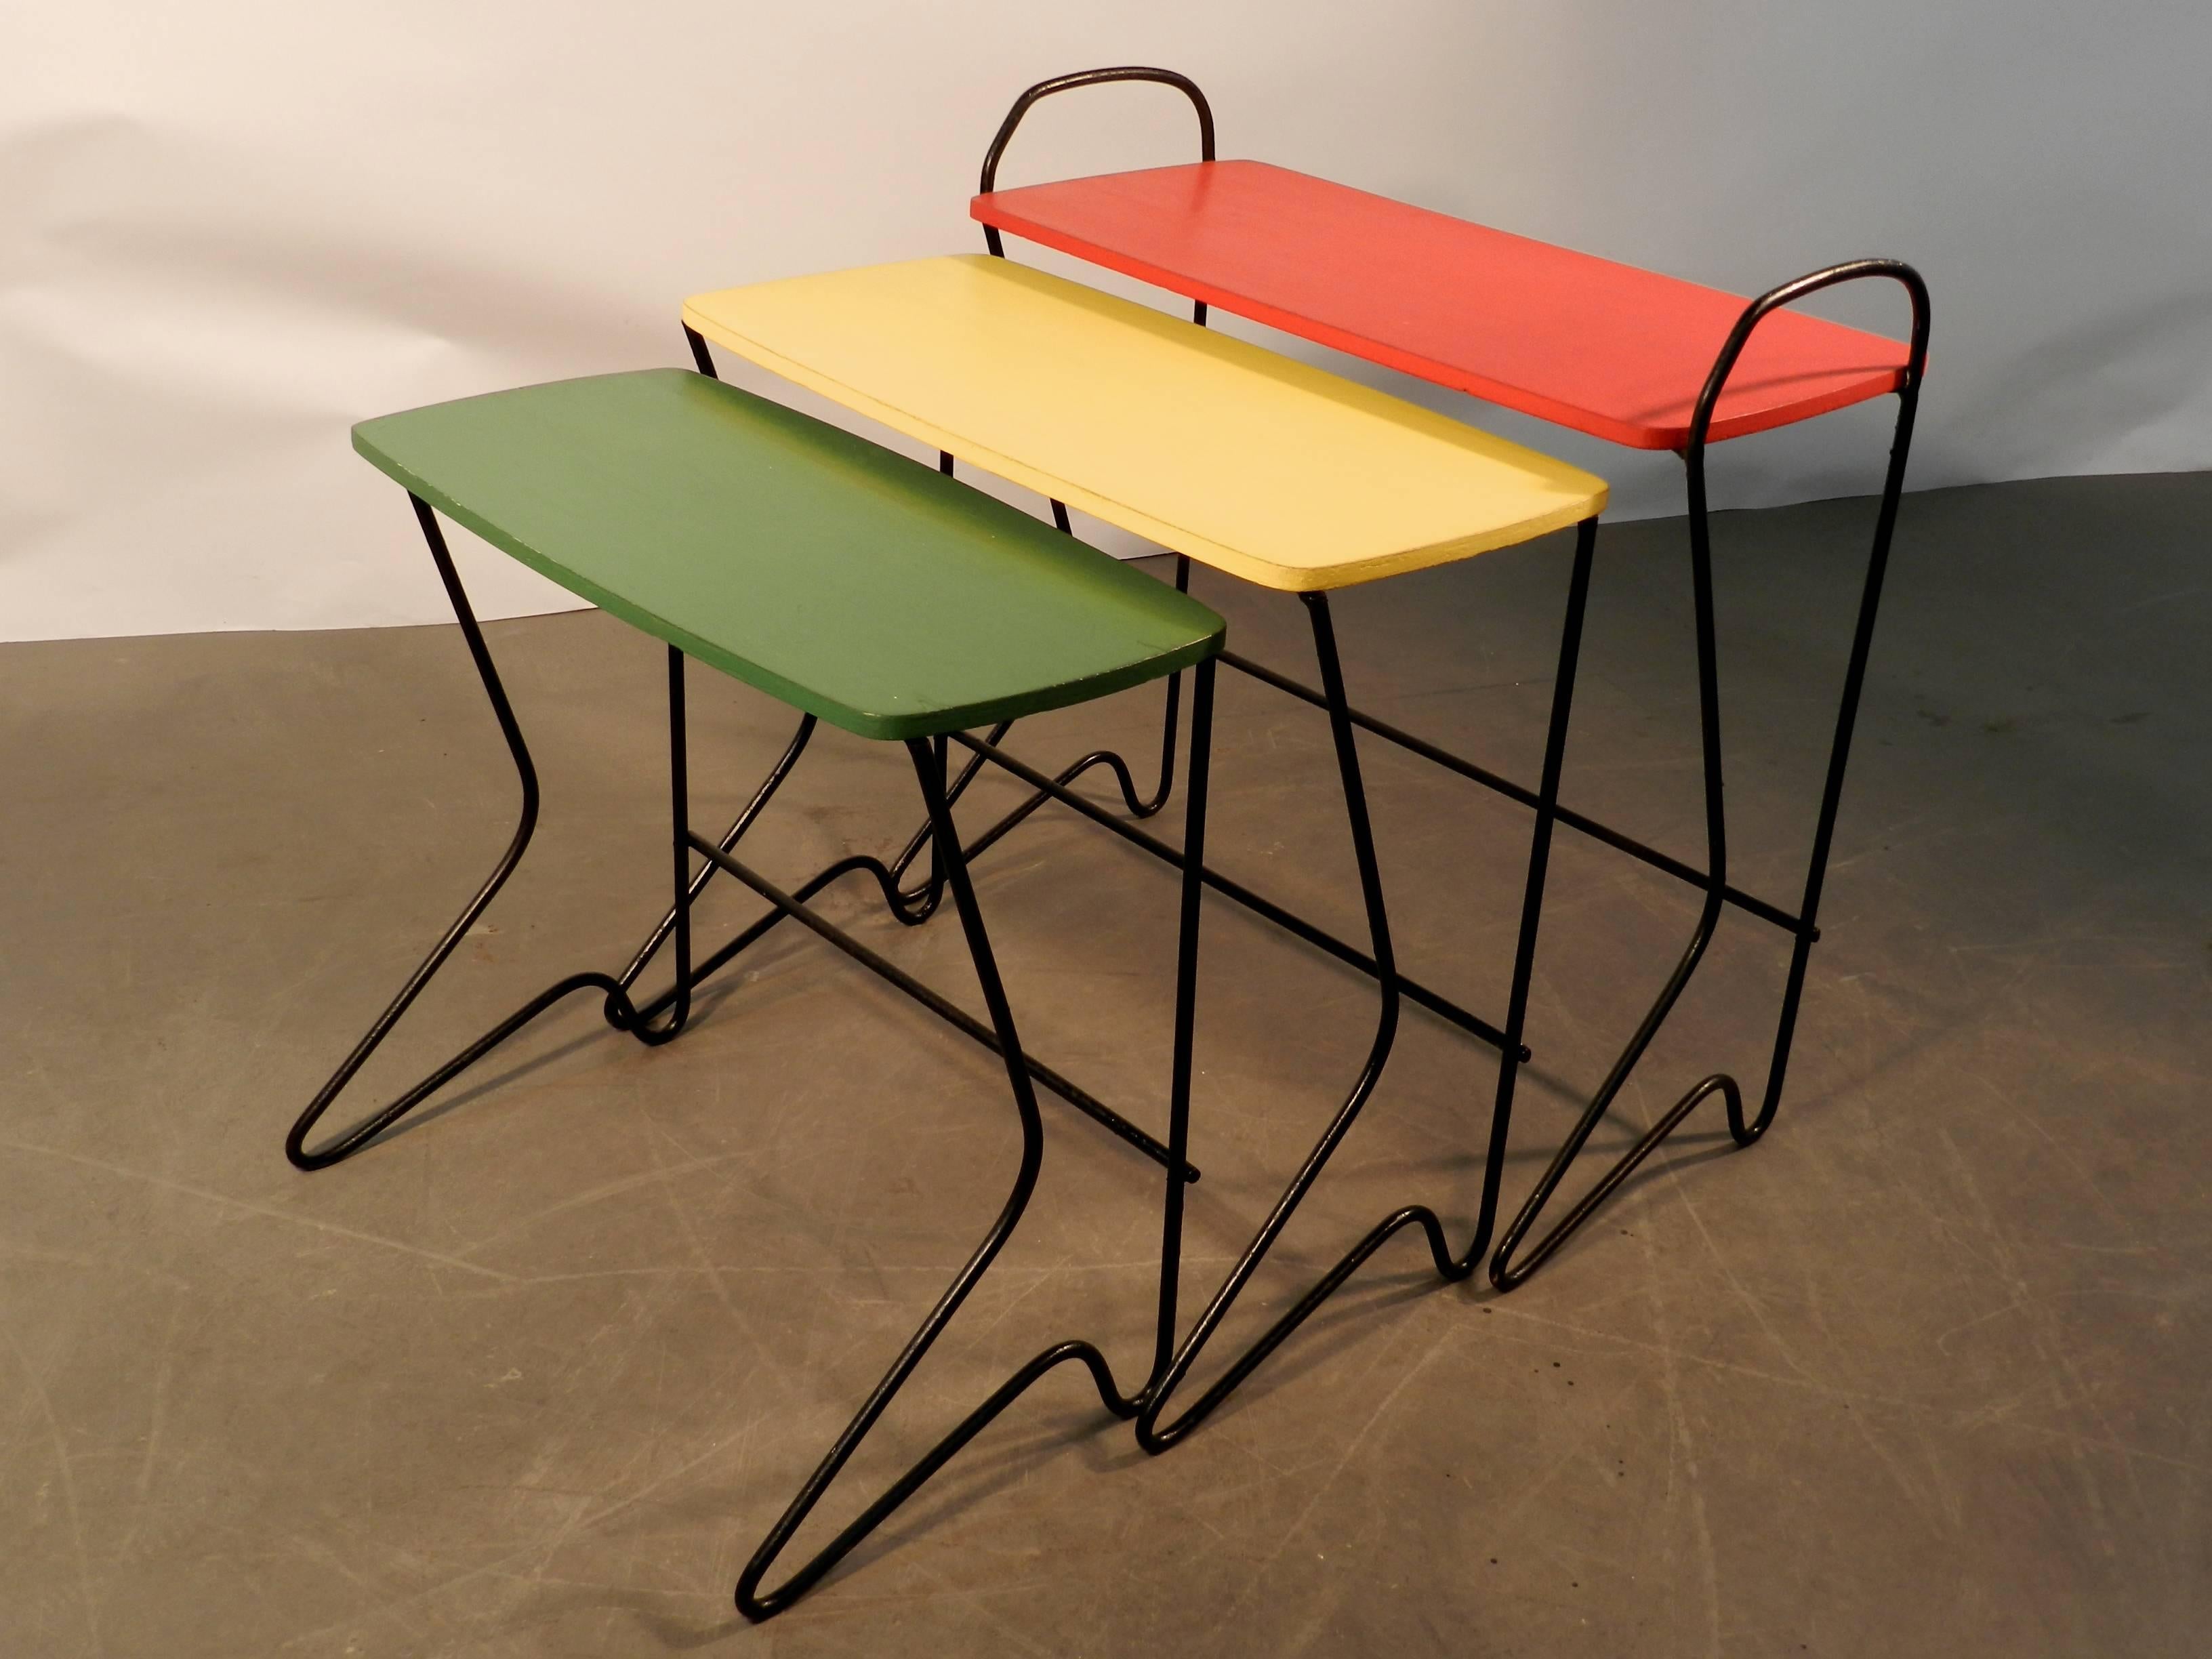 Mid-20th Century Belgium Design, Set of Three Nesting Tables Metal and Lacquered Wood, circa 1950 For Sale